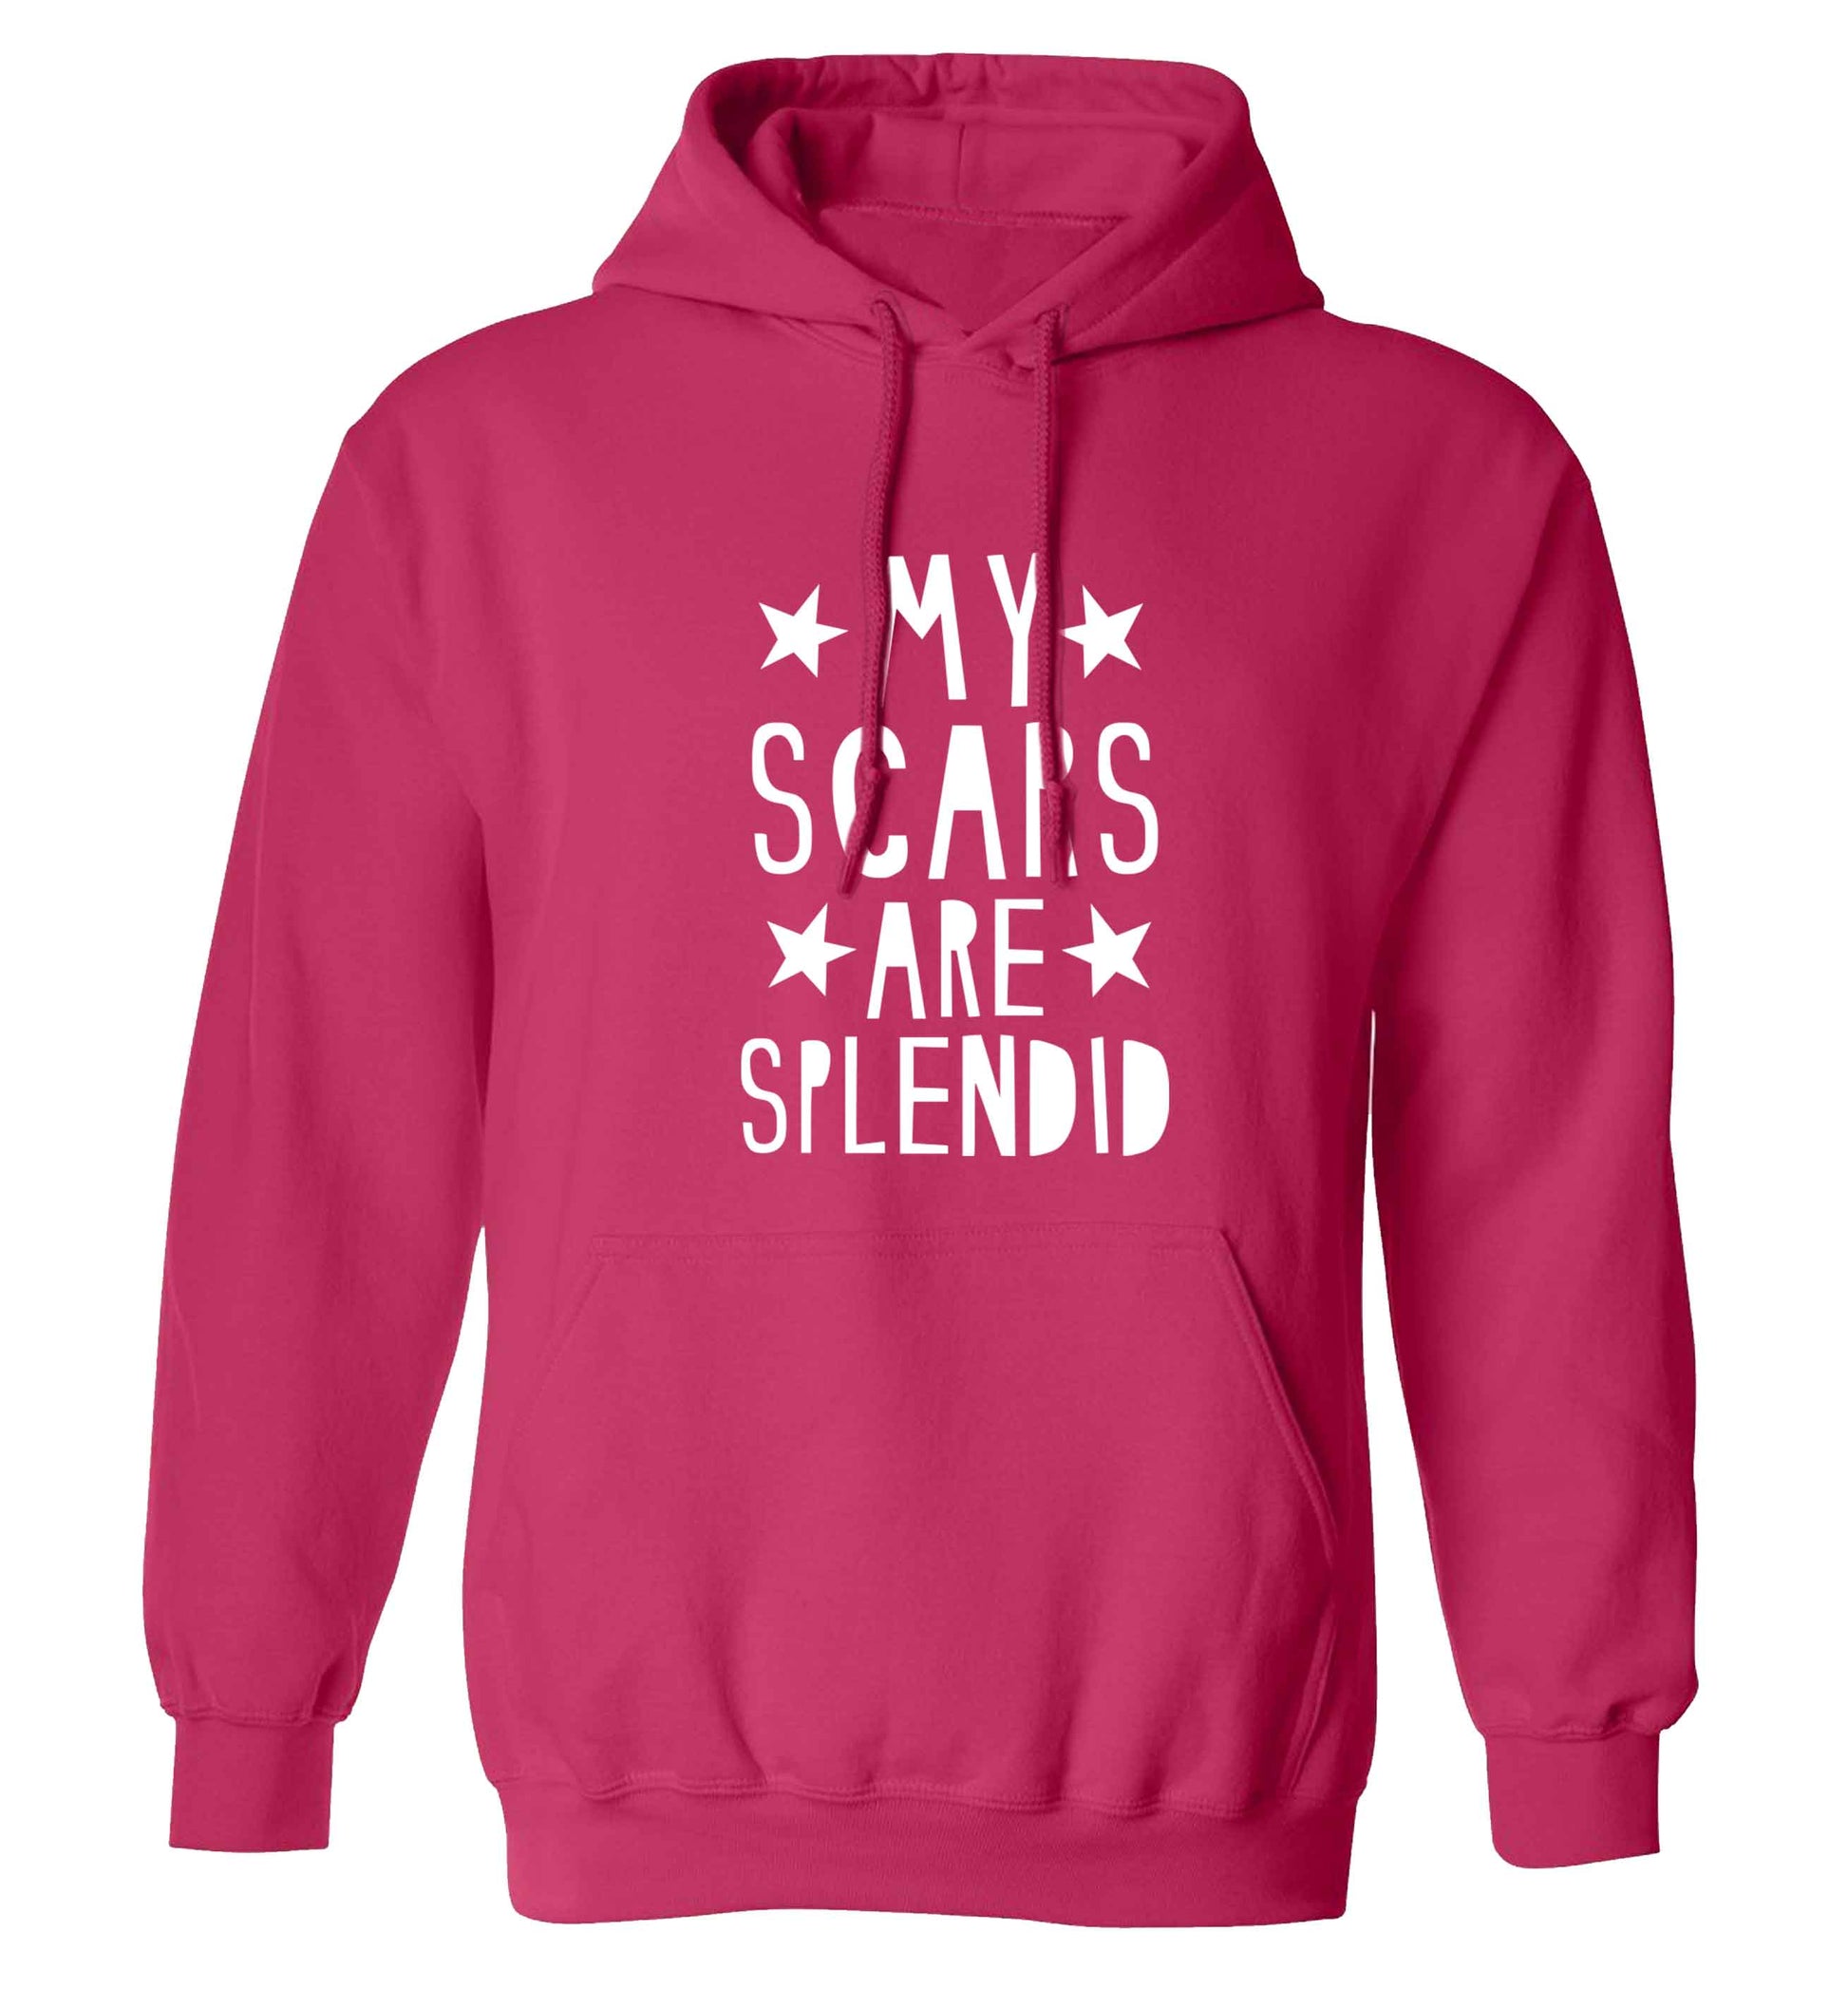 My scars are beautiful adults unisex pink hoodie 2XL